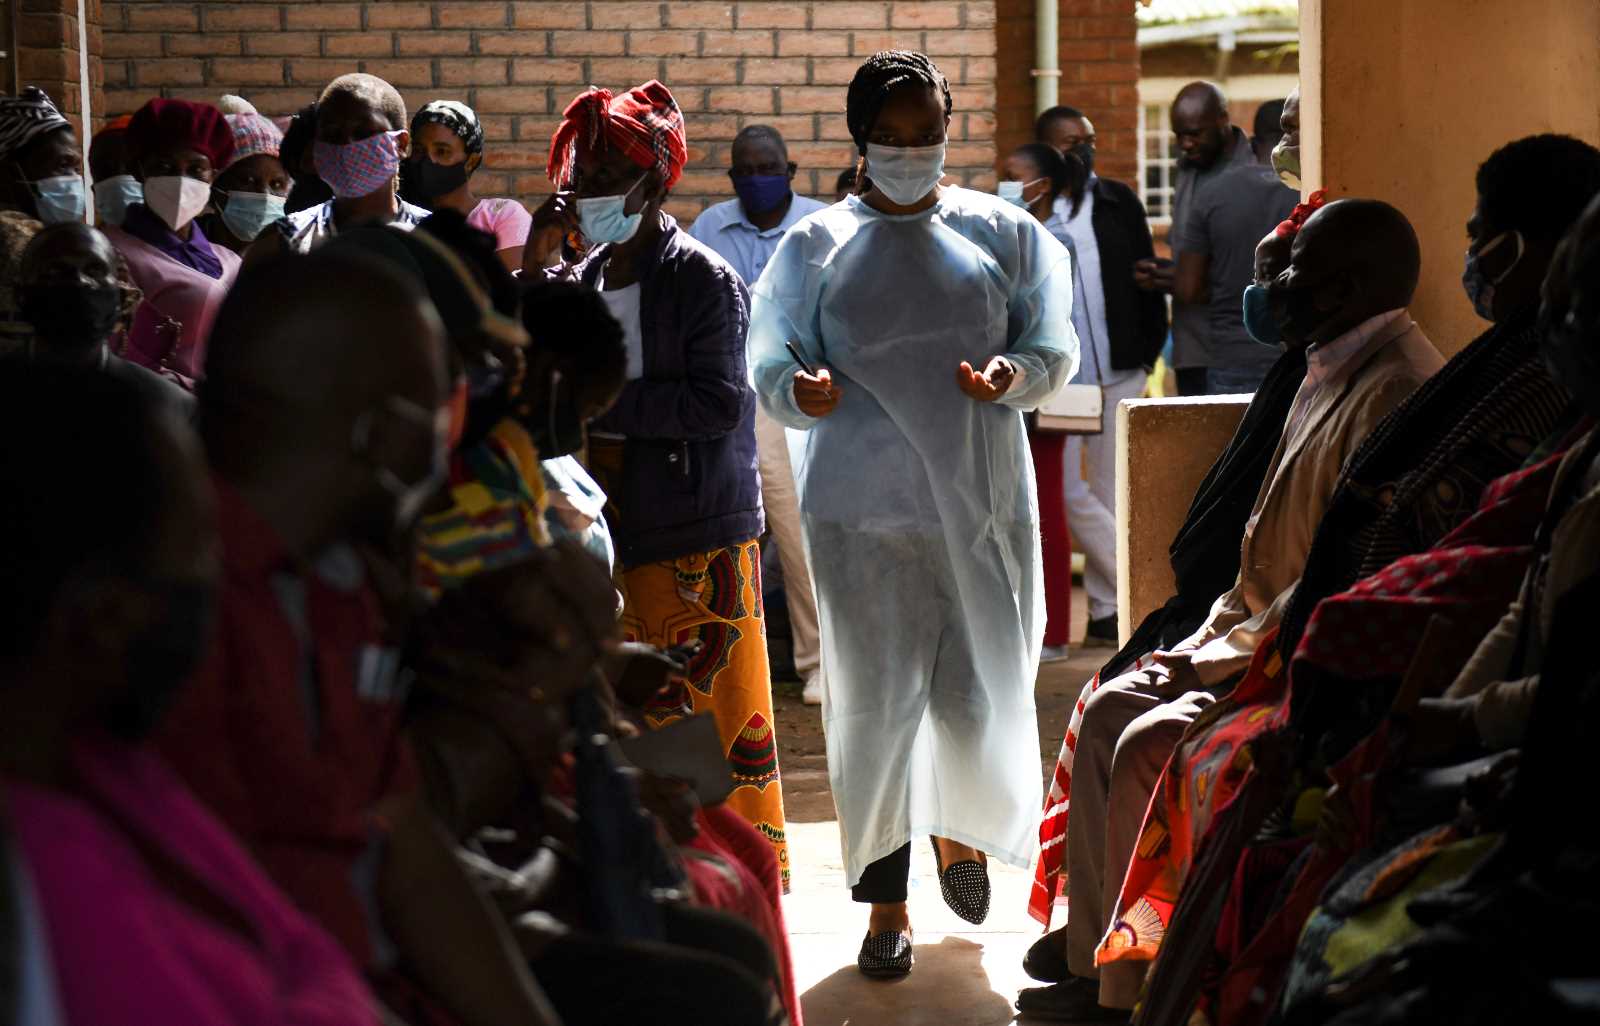 Malawians waiting to receive the COVID-19 vaccine at Ndirande Health Centre in Blantyre, in 2021.